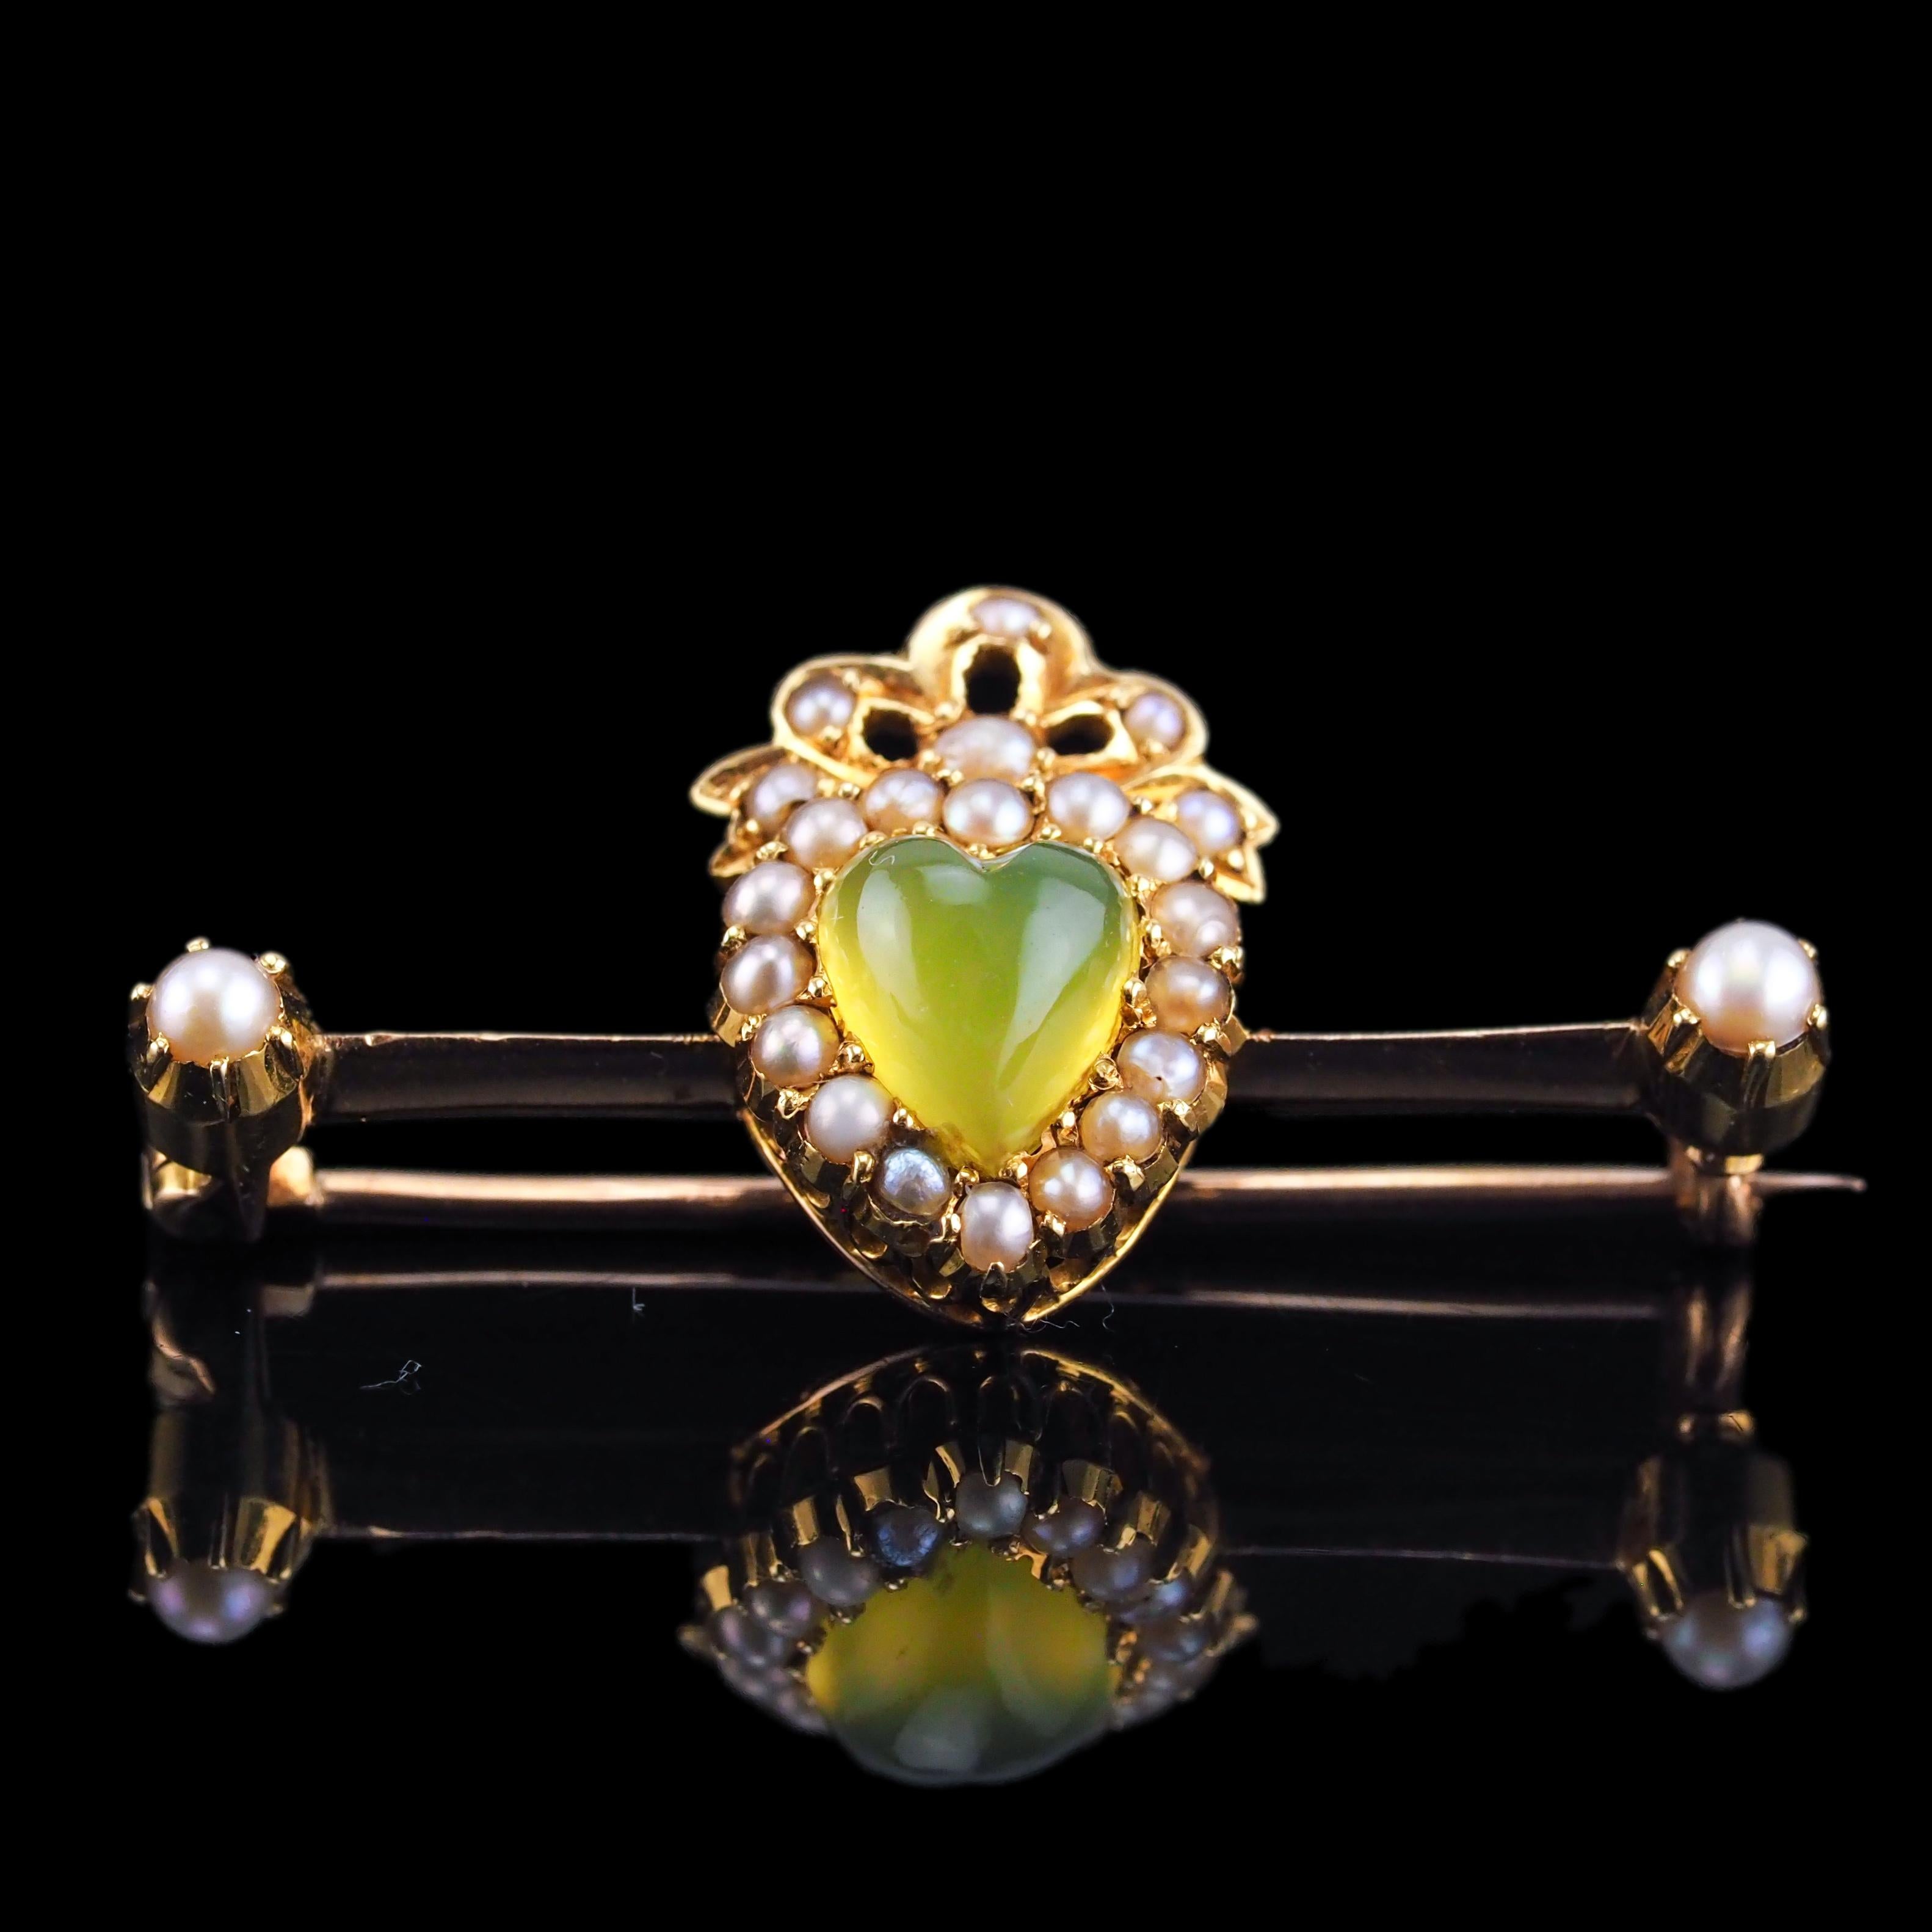 Antique Victorian Chalcedony Brooch  Seed Pearls 15K Gold Heart Shaped c.1890 For Sale 5